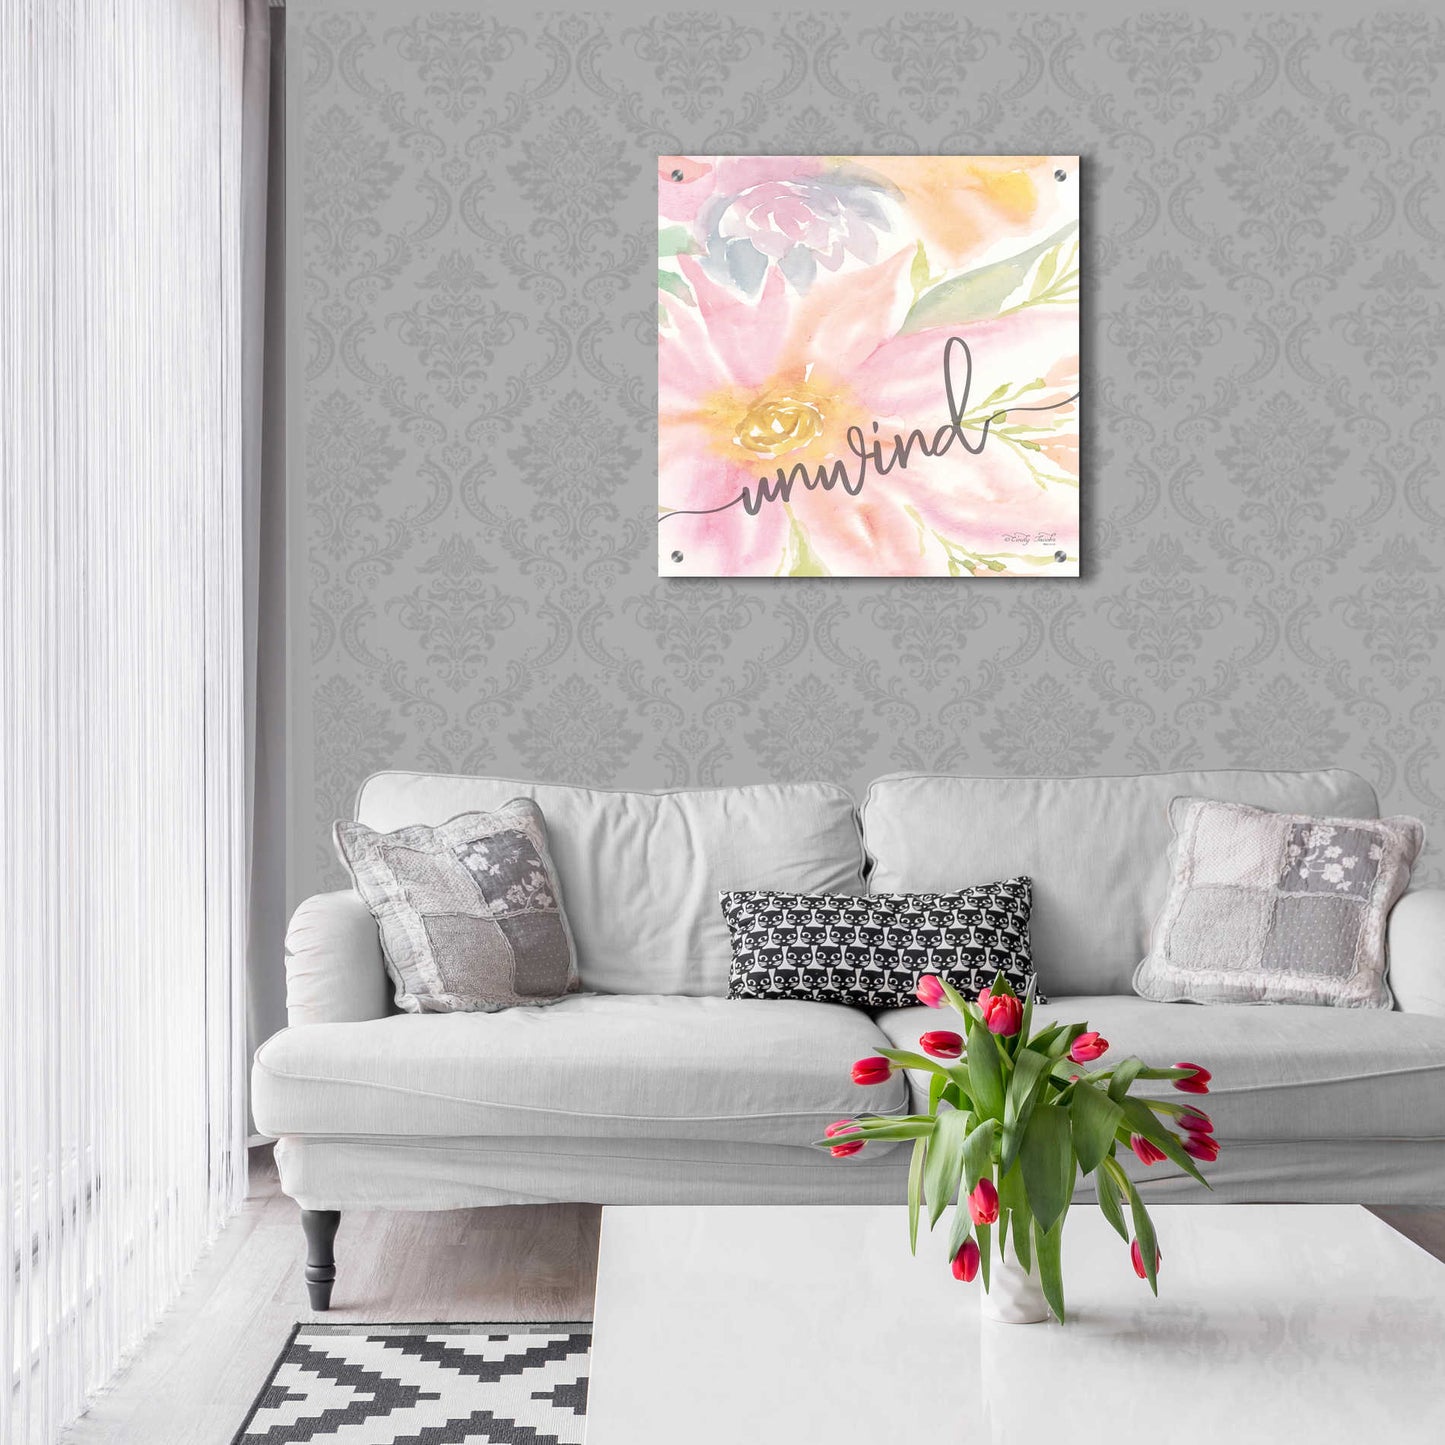 Epic Art 'Floral Unwind' by Cindy Jacobs, Acrylic Glass Wall Art,24x24